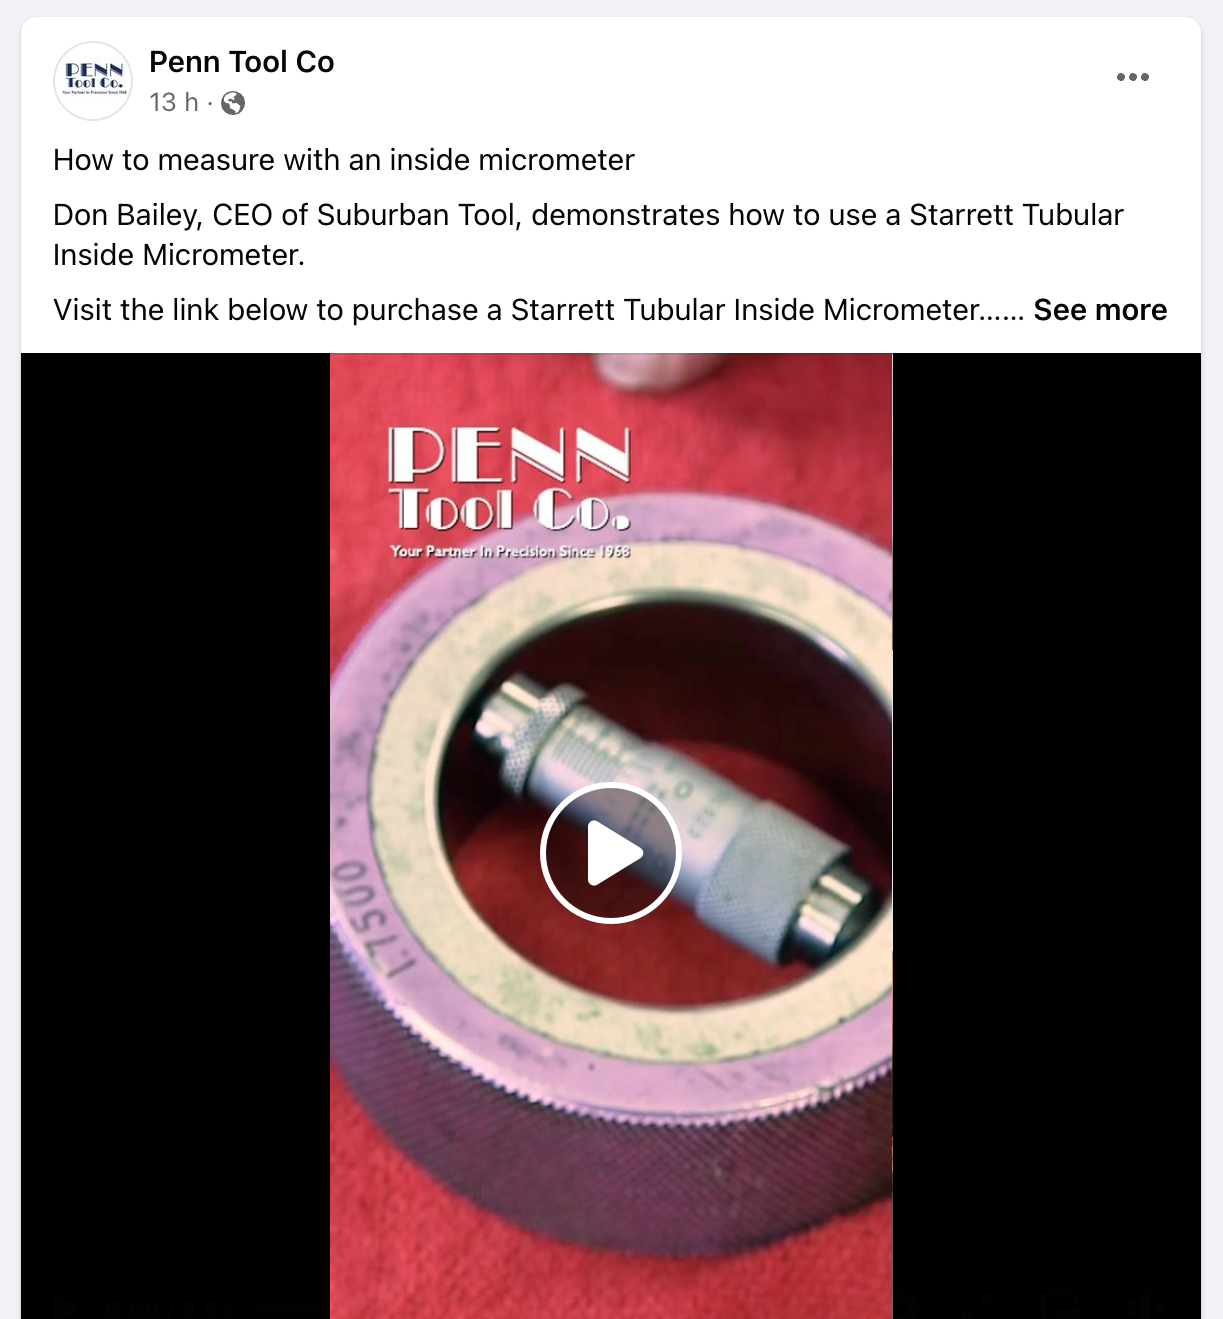 Facebook Page of Penn Tool Co